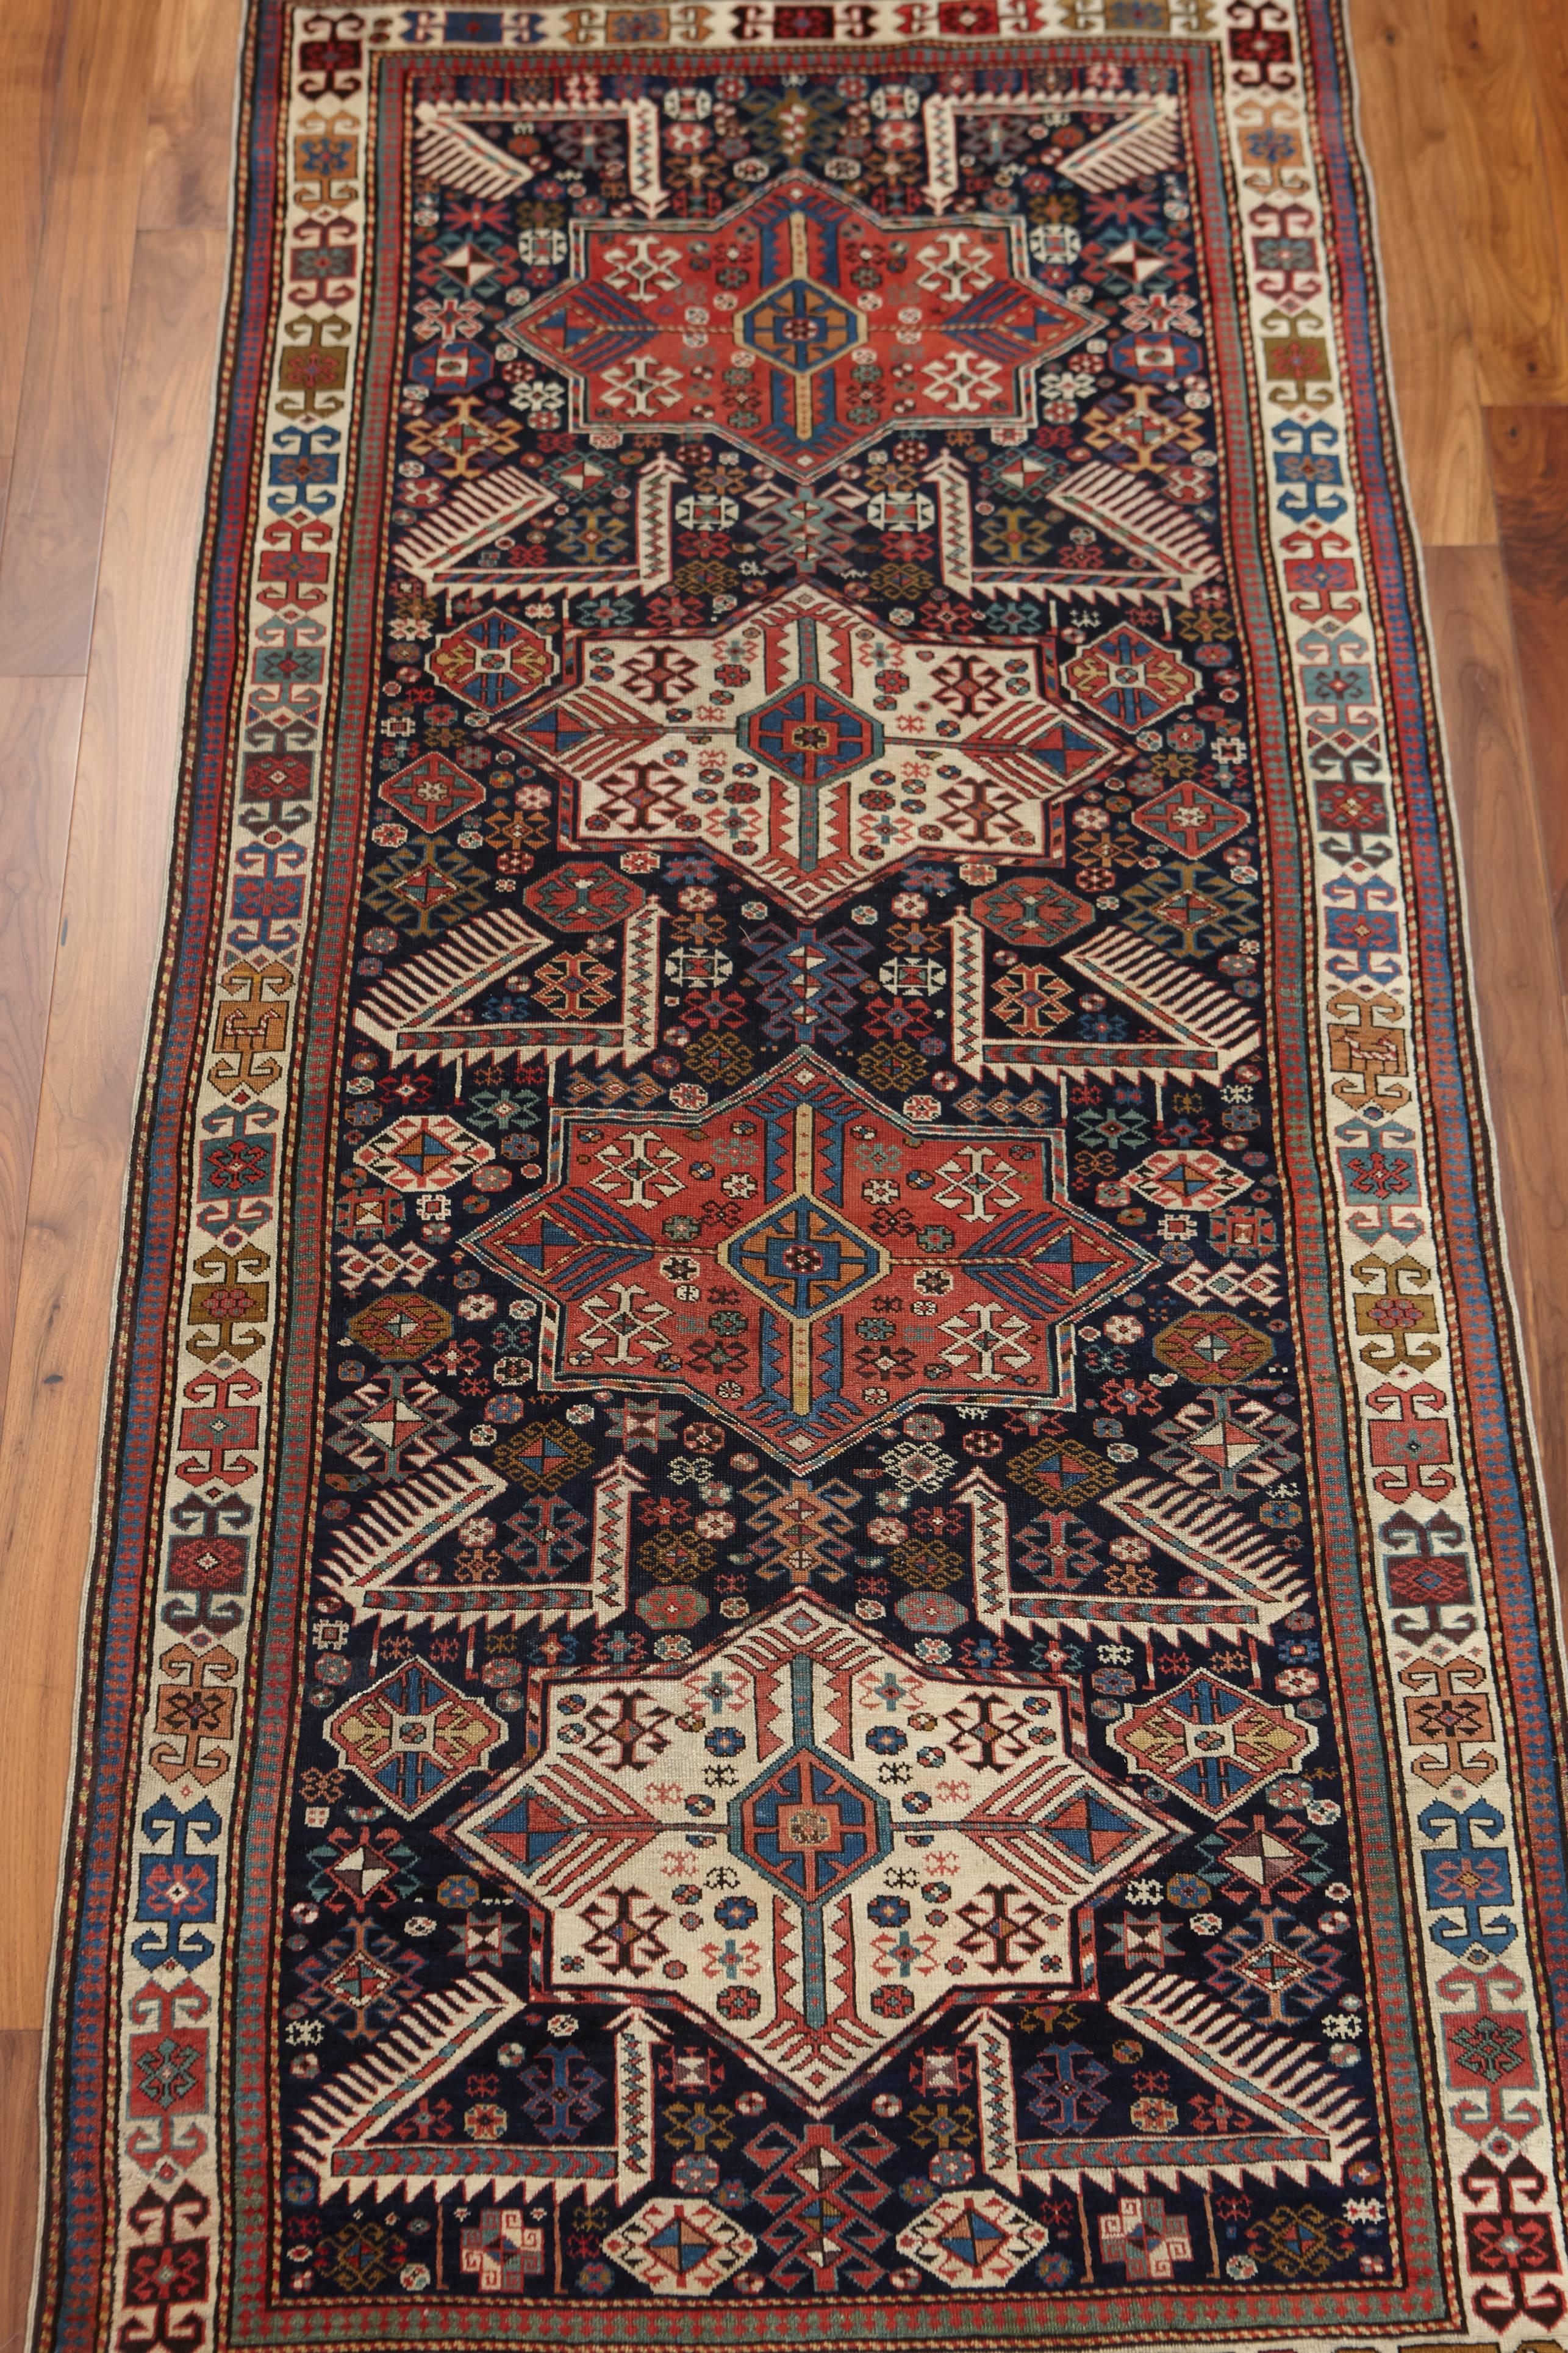 Some of the most recognizable rugs weaved in the Shirvan region and in Shirvan style are Akstafa rugs. Noted for their use of exemplary Akstafa stars and stylized peacocks, these rugs have stood the test of time with their combinations of earthy &